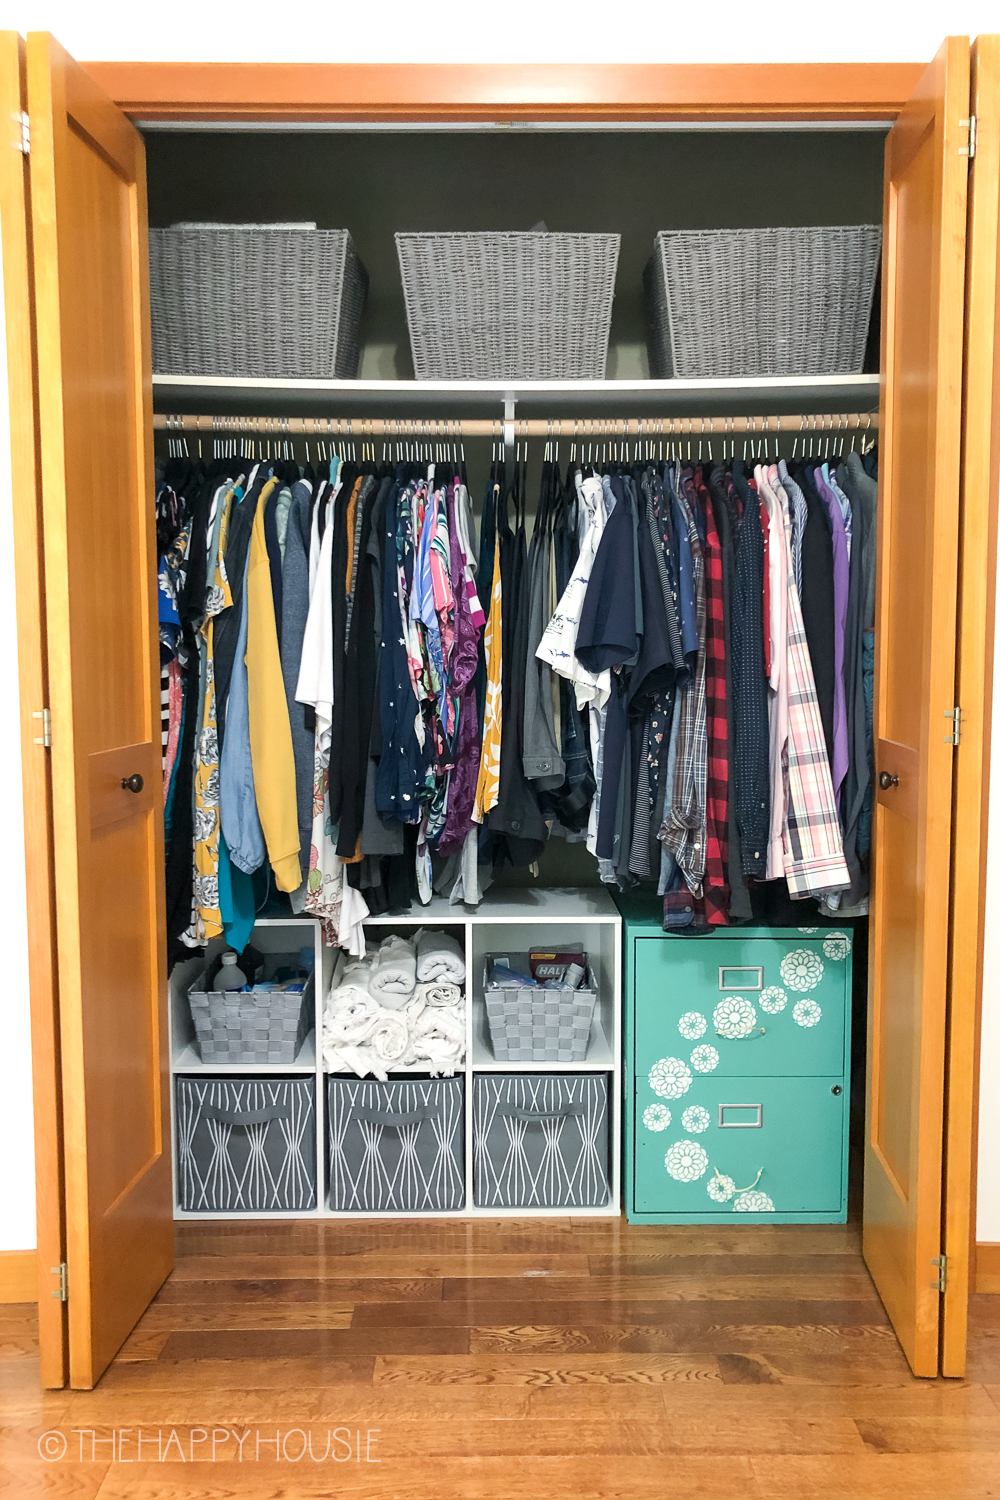 How To Organize A Small Reach In Closet, How To Organize Clothing Shelves